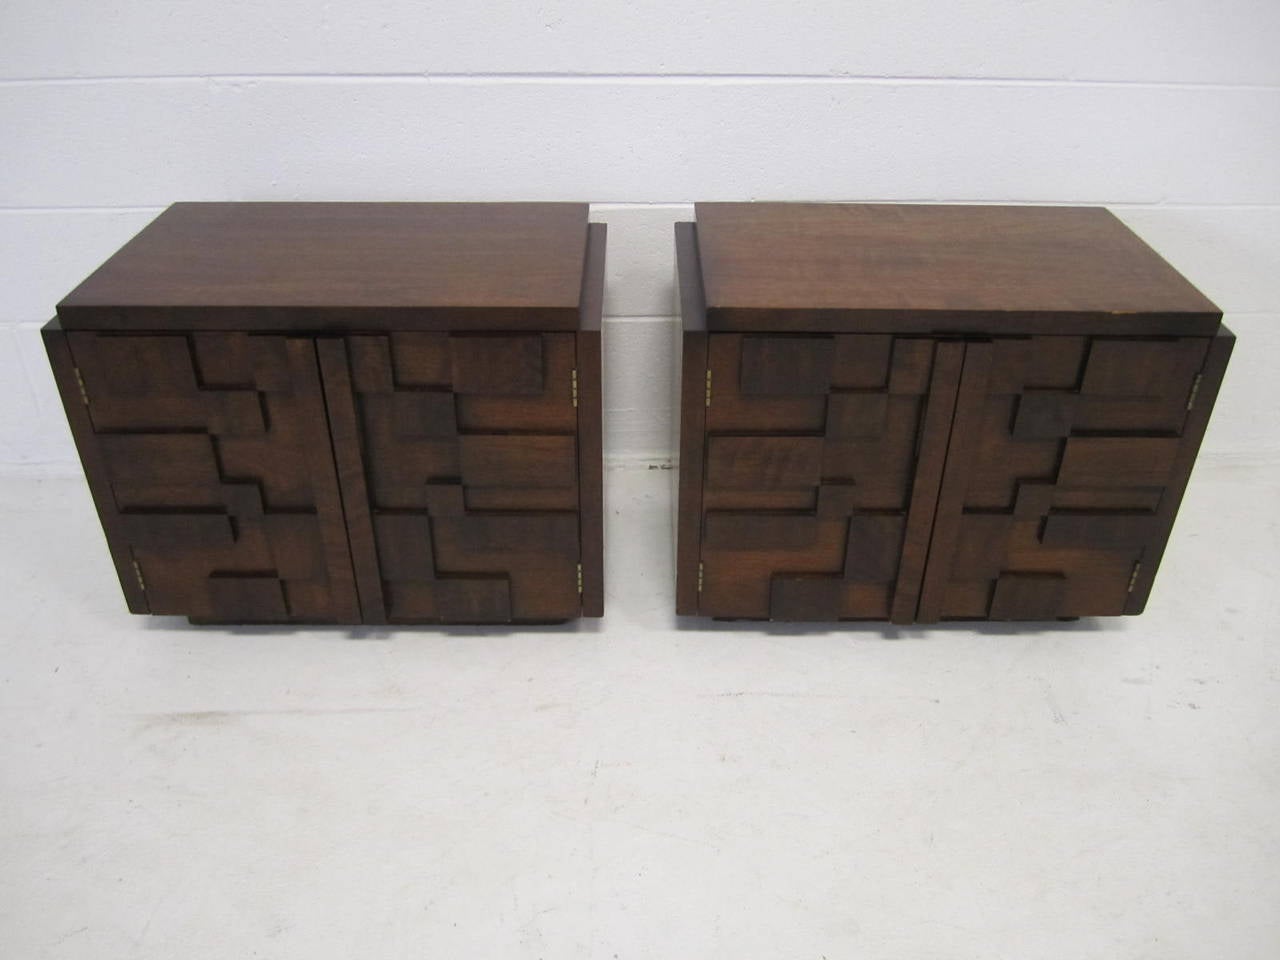 Handsome pair of Paul Evans inspired chunky walnut mosaic nightstands made by Lane. They are well constructed and in very nice condition. The doors open to reveal a nice open space with one fixed shelf. I do have more pieces from this same